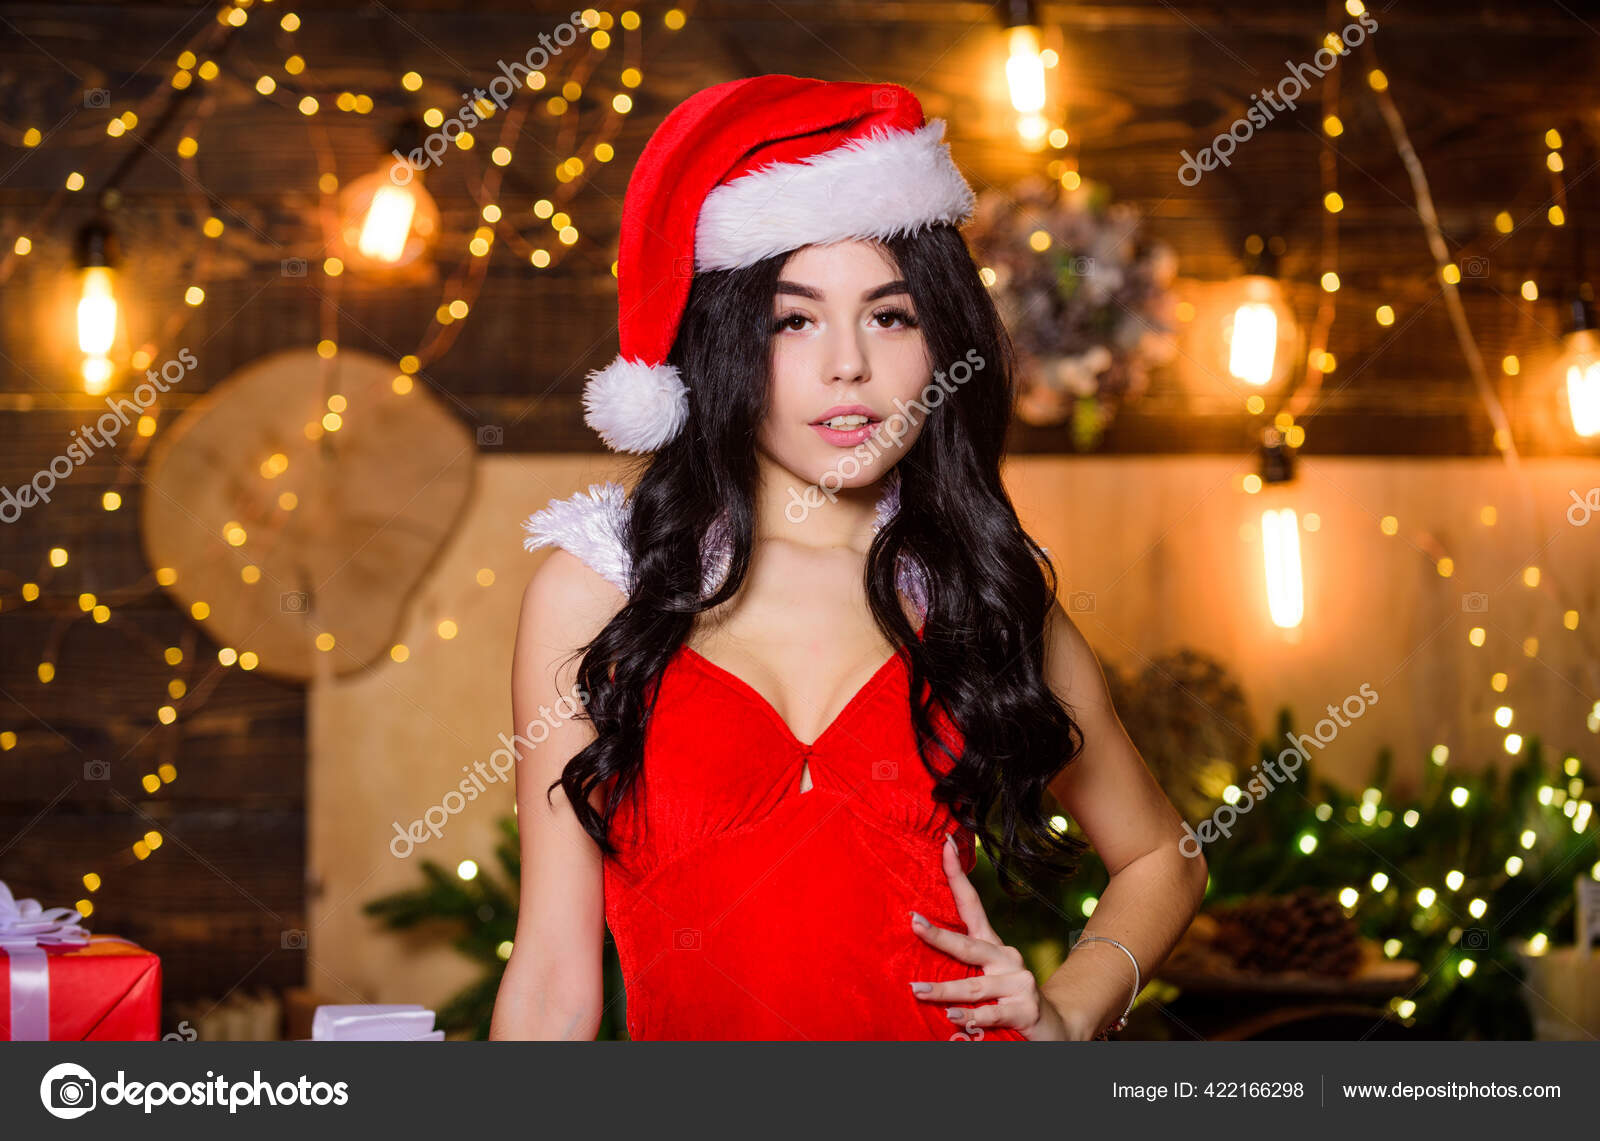 Naughty new nice. Erotic surprise. Sexual holidays. Attractive girl erotic lingerie. Desirable Santa girl. Party for adults. Lingerie boutique. Merry christmas